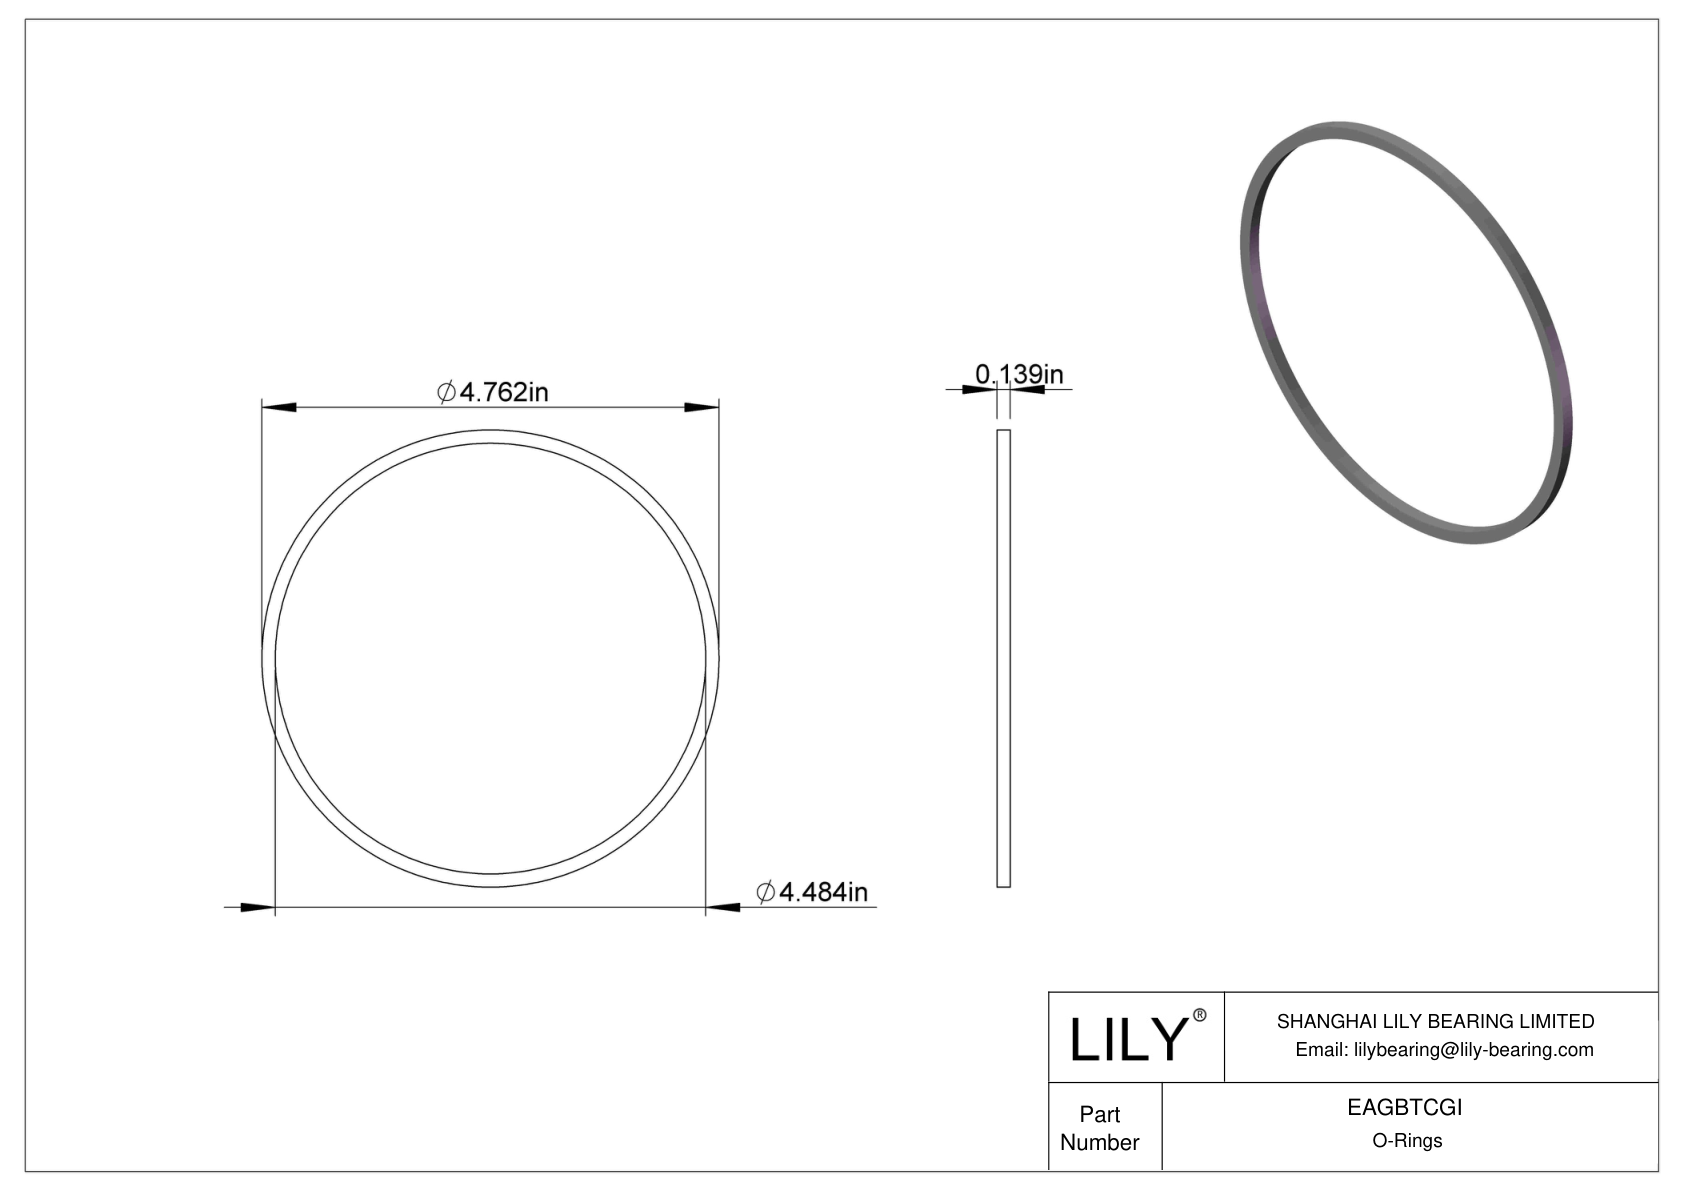 EAGBTCGI Oil Resistant O-Rings Square cad drawing